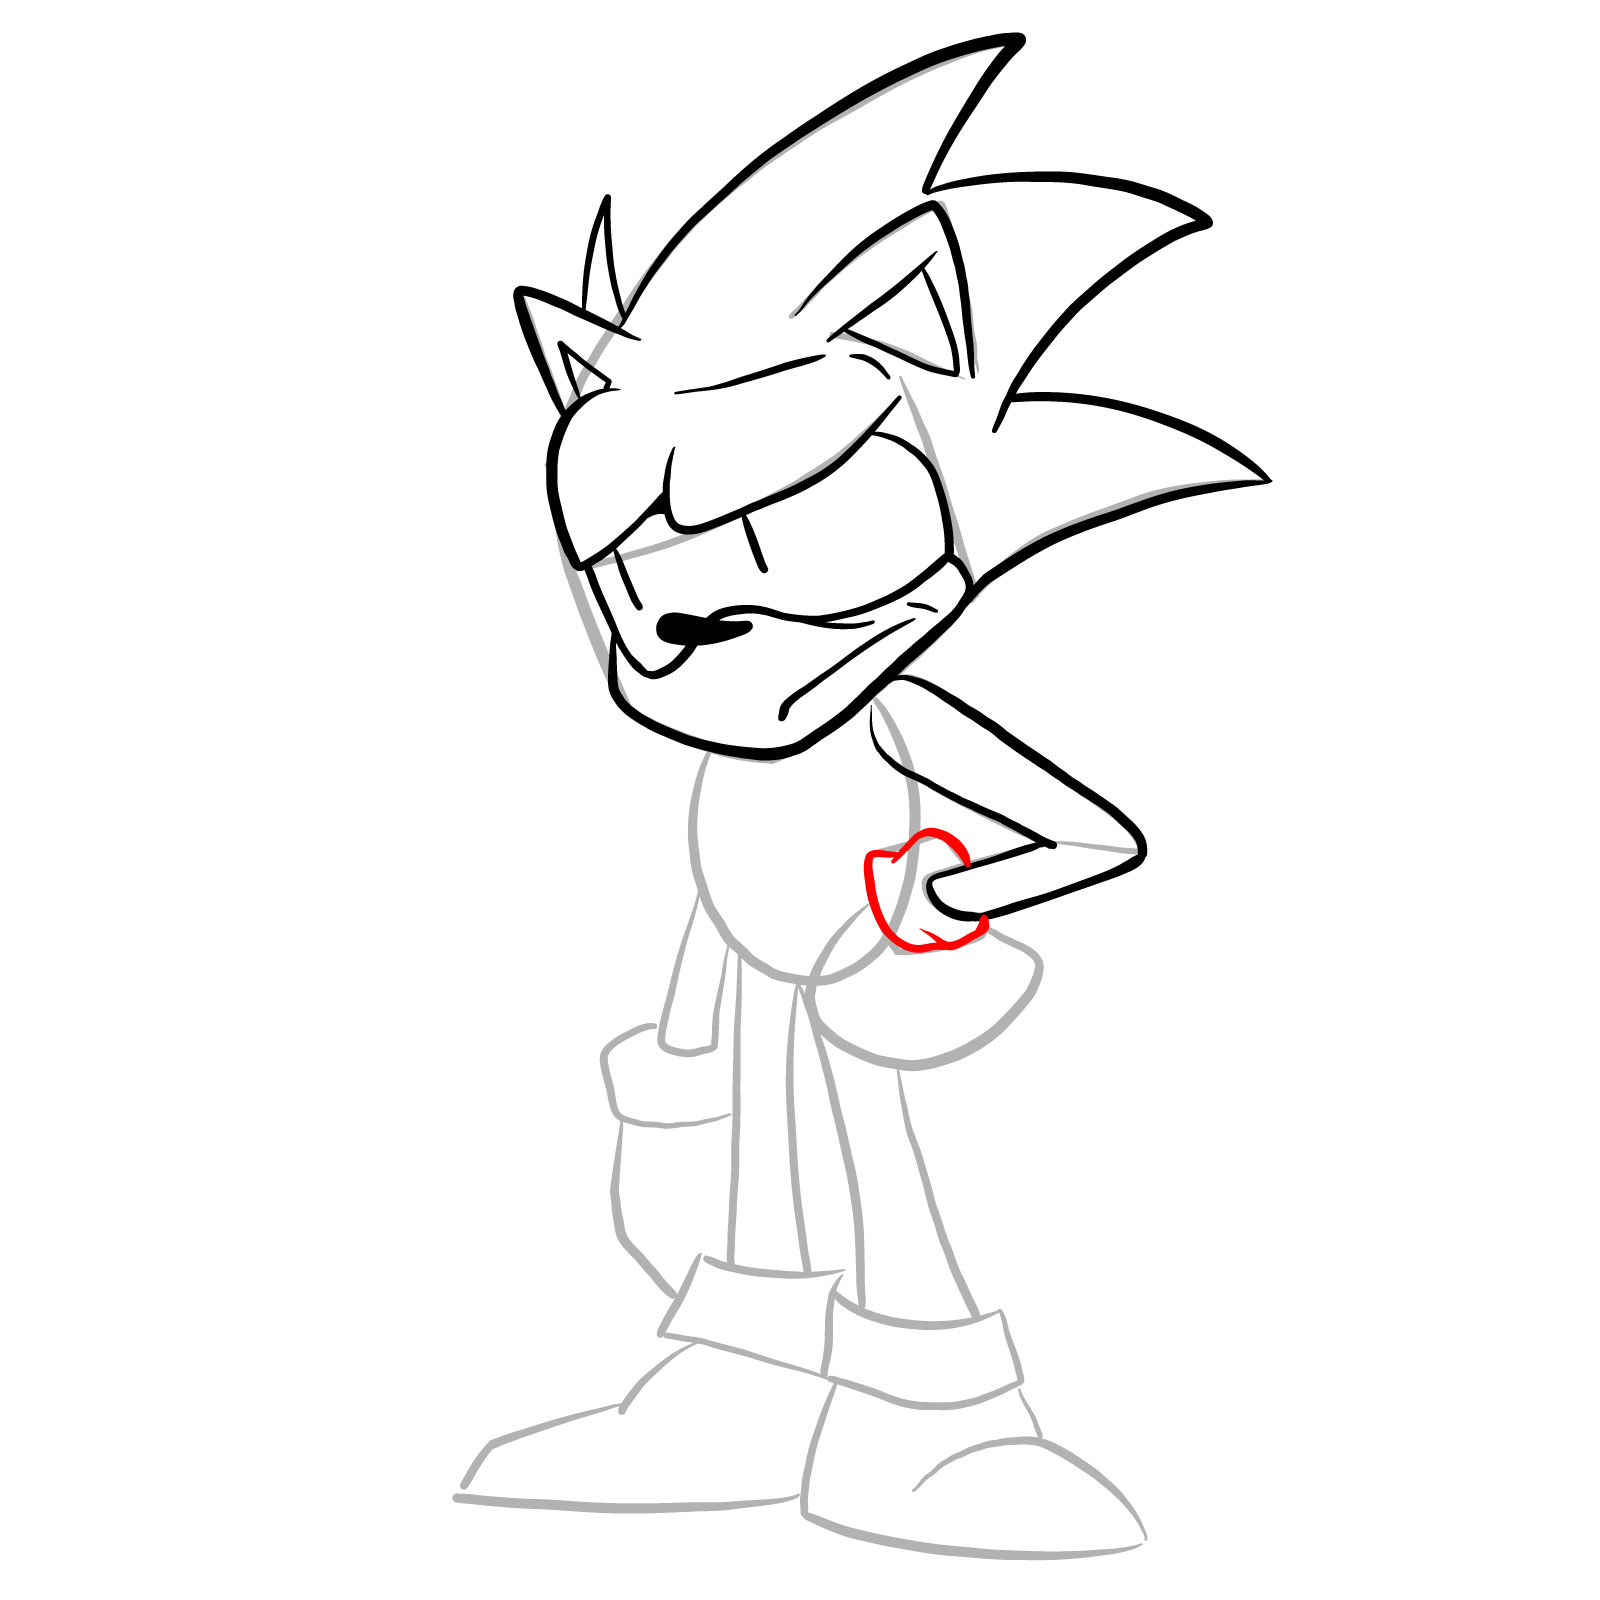 How to draw Sonic - FNF: Secret Histories - step 14